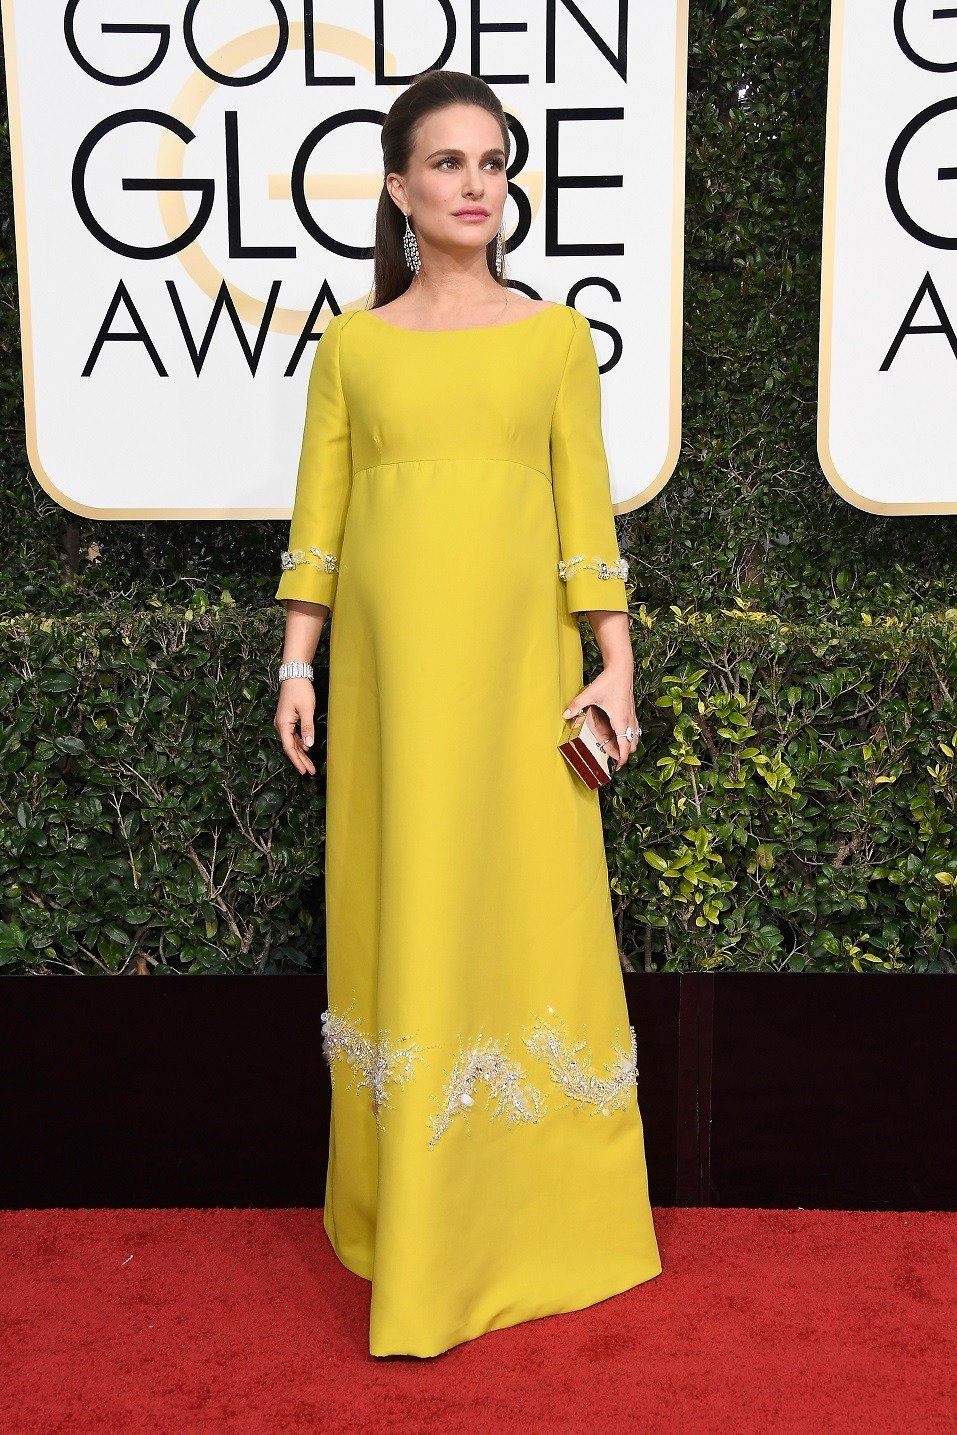 Actress Natalie Portman attends the 74th Annual Golden Globe Awards at The Beverly Hilton Hotel